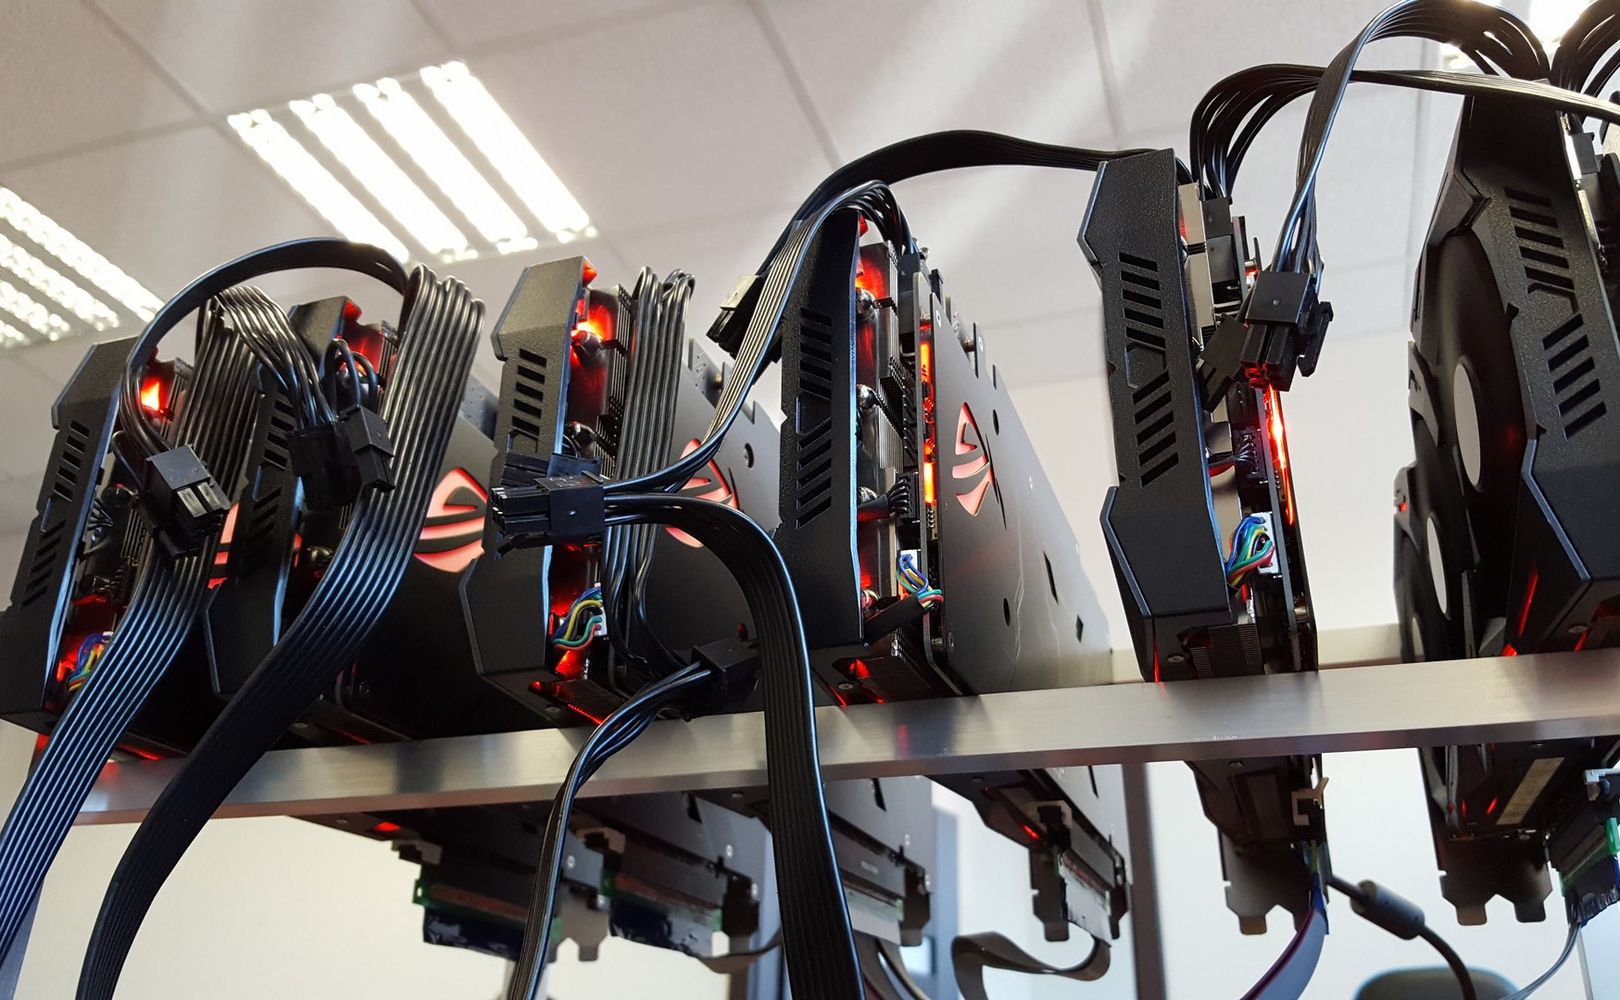 Radeon RX 6000 cards go to crypto miners